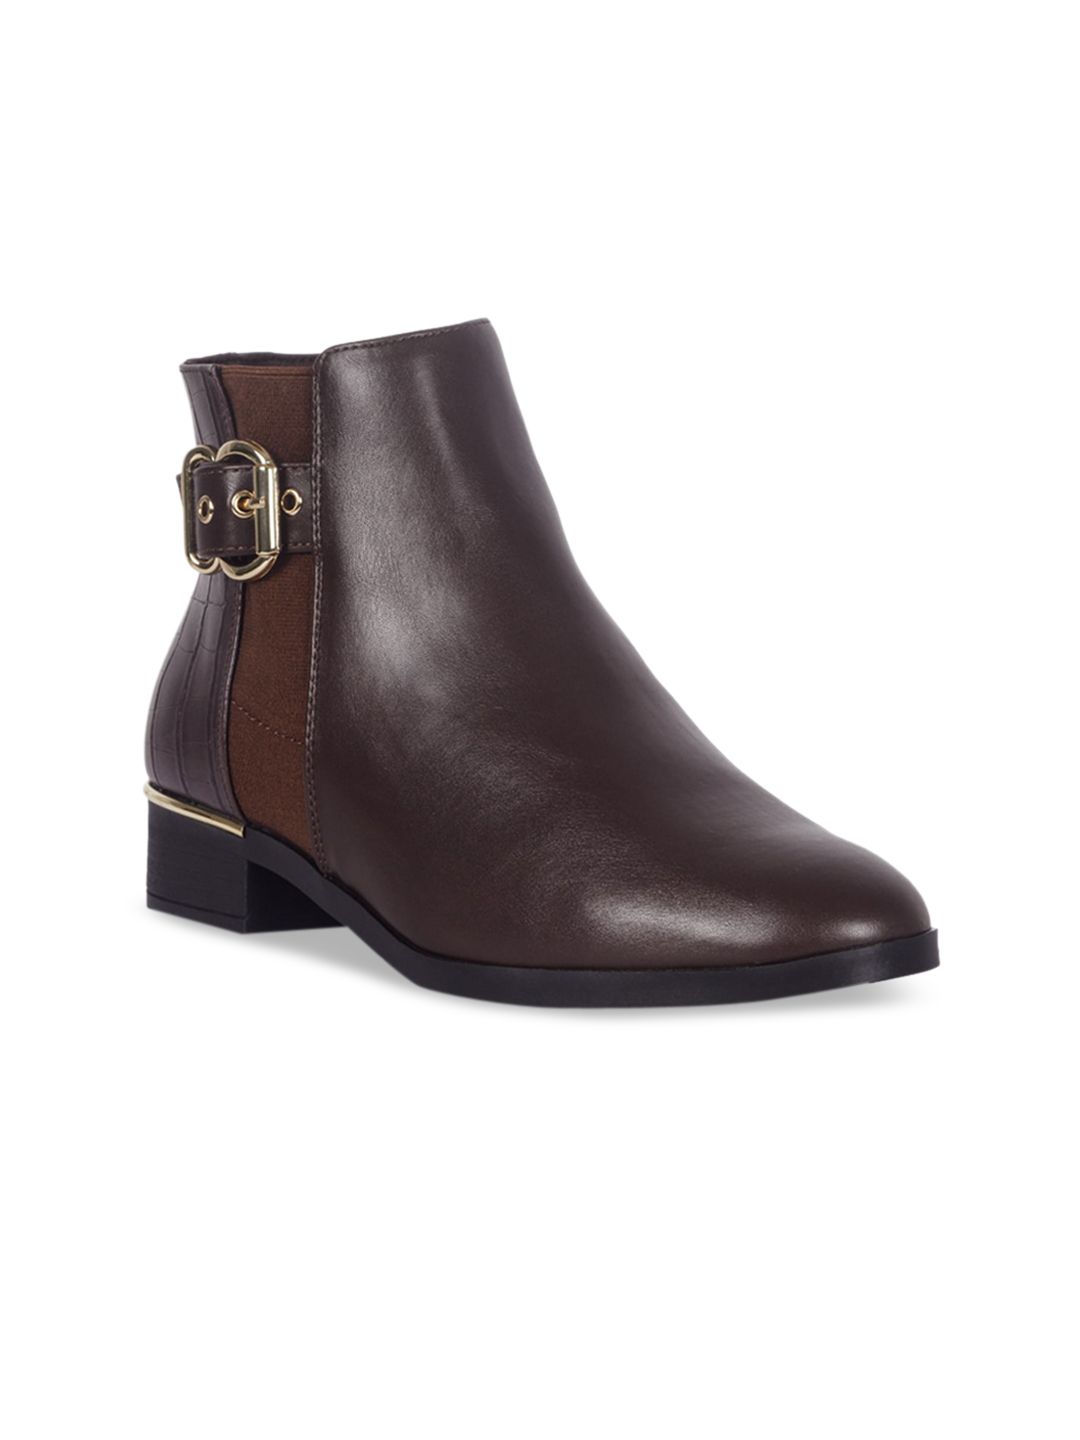 London Rag Brown Block Heeled Boots with Buckles Price in India